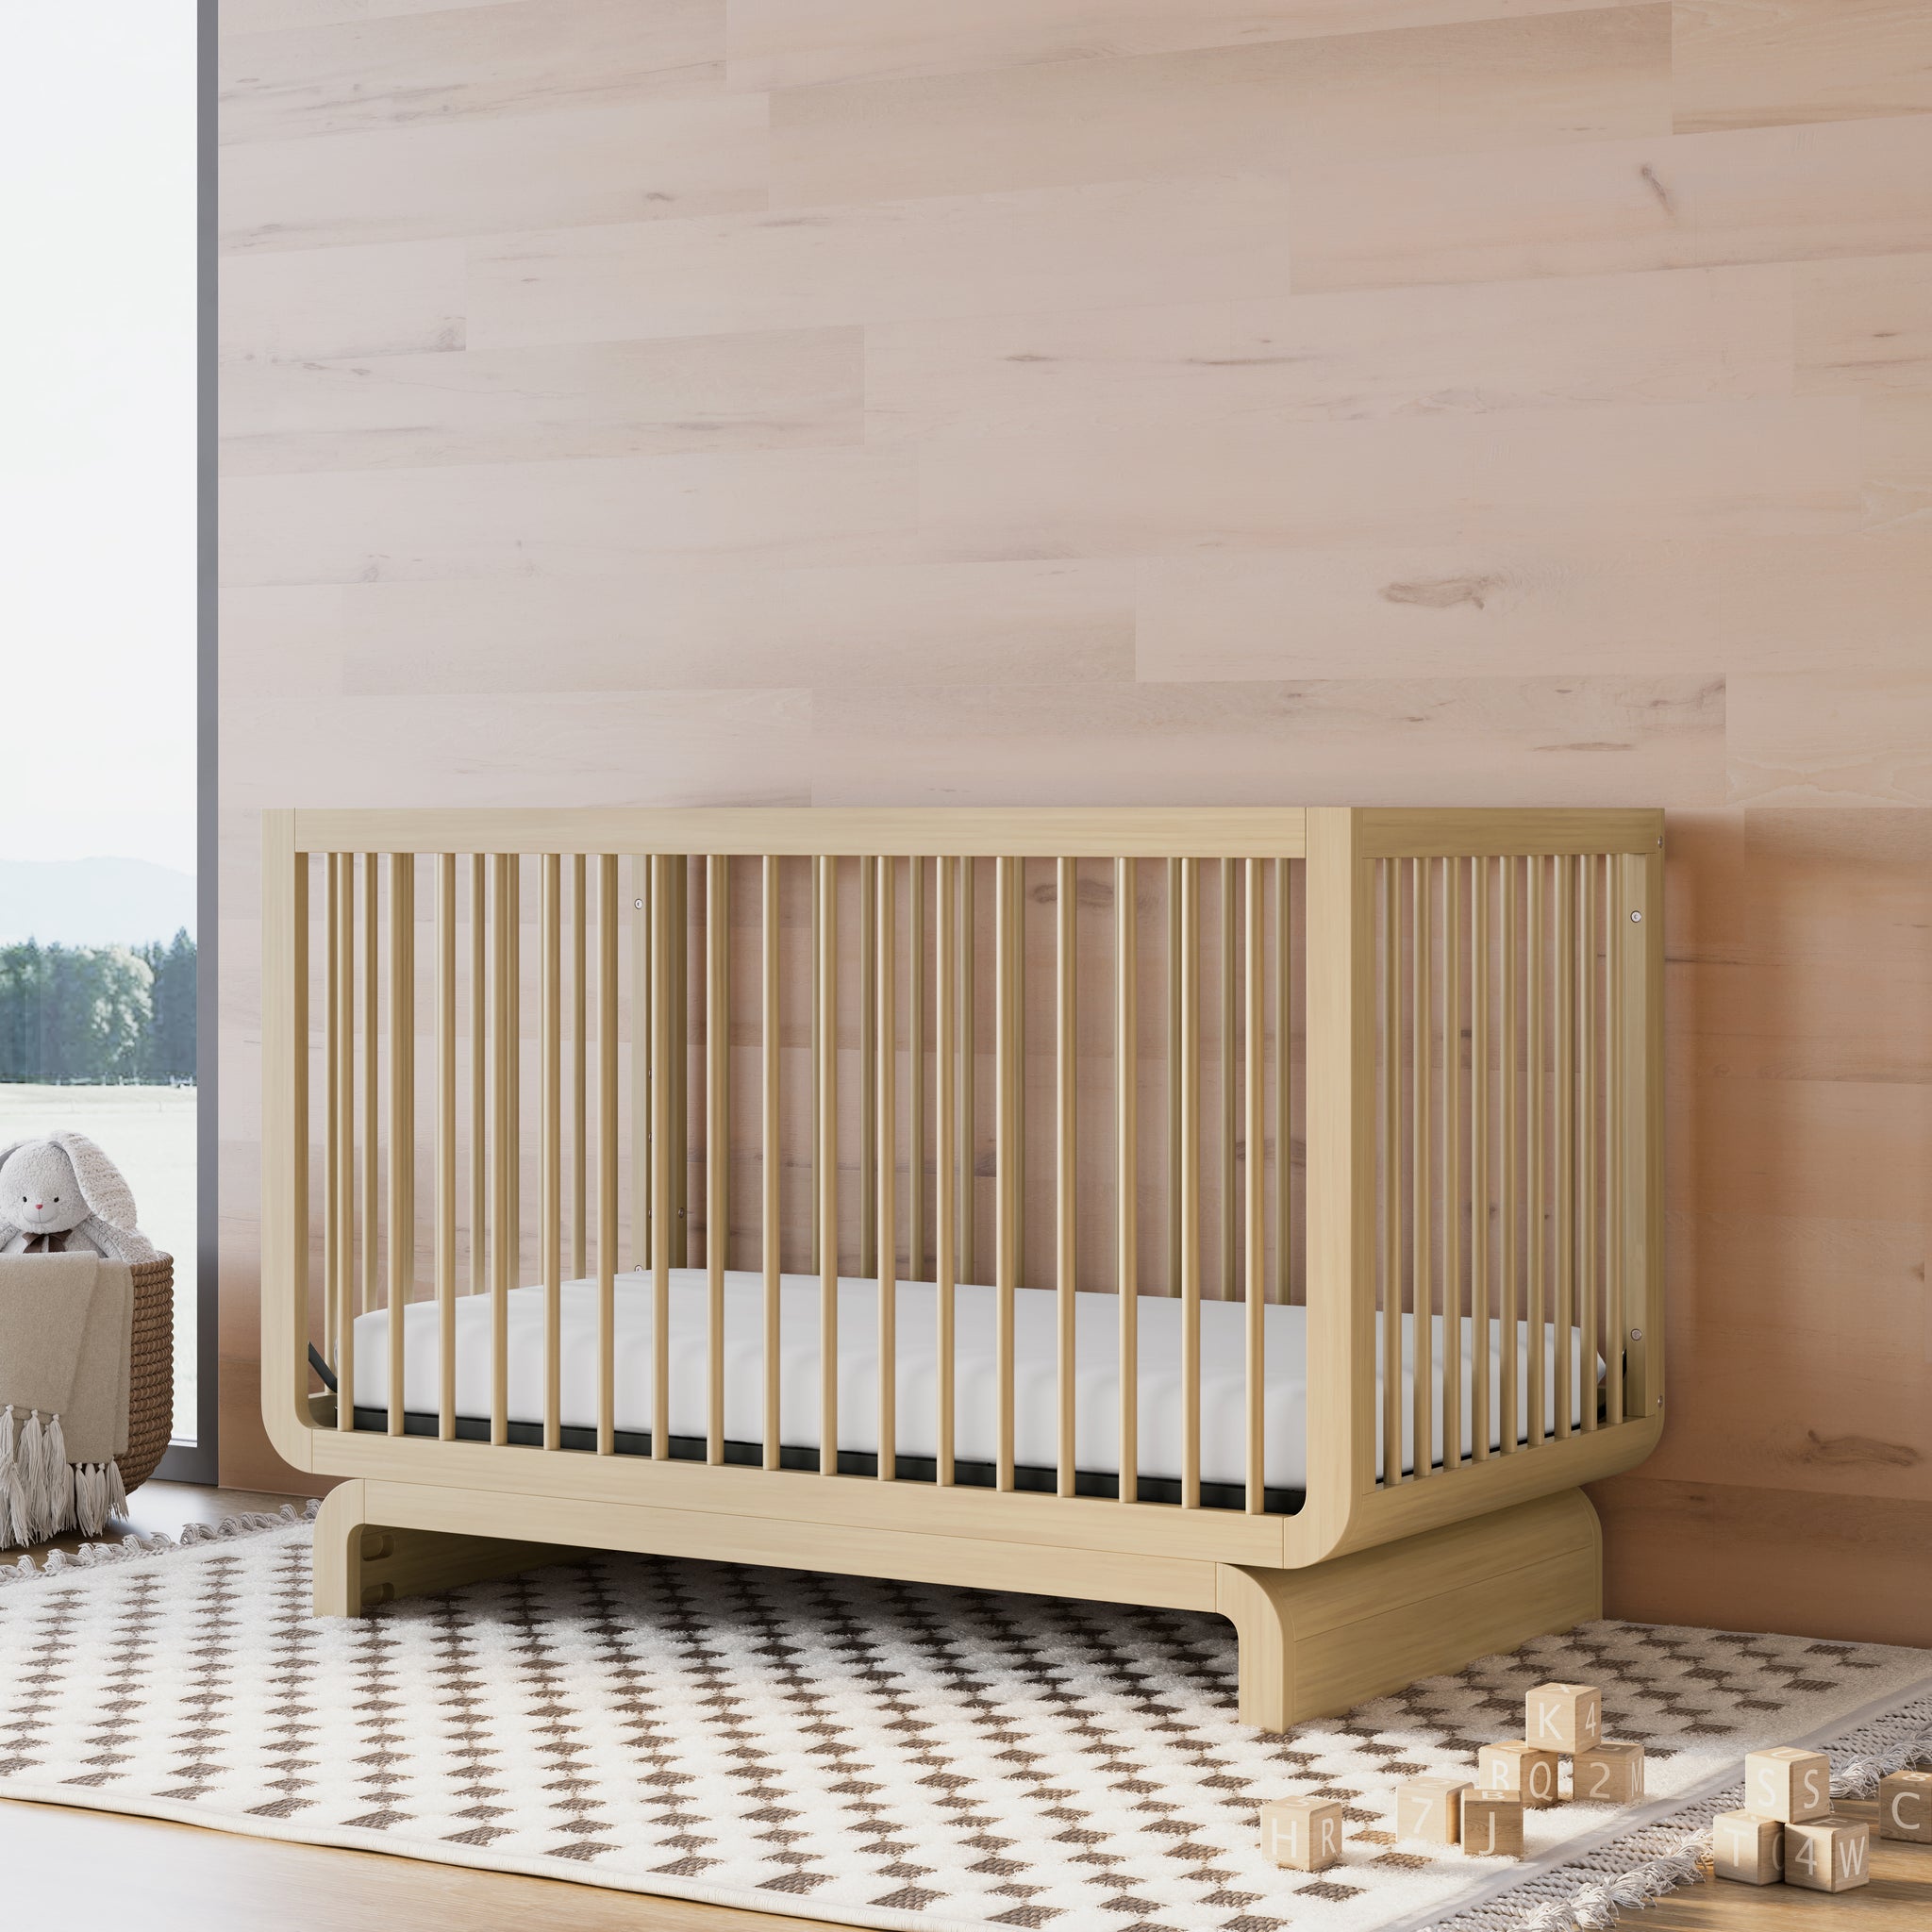 Convertible crib in driftwood colorway in a nursery